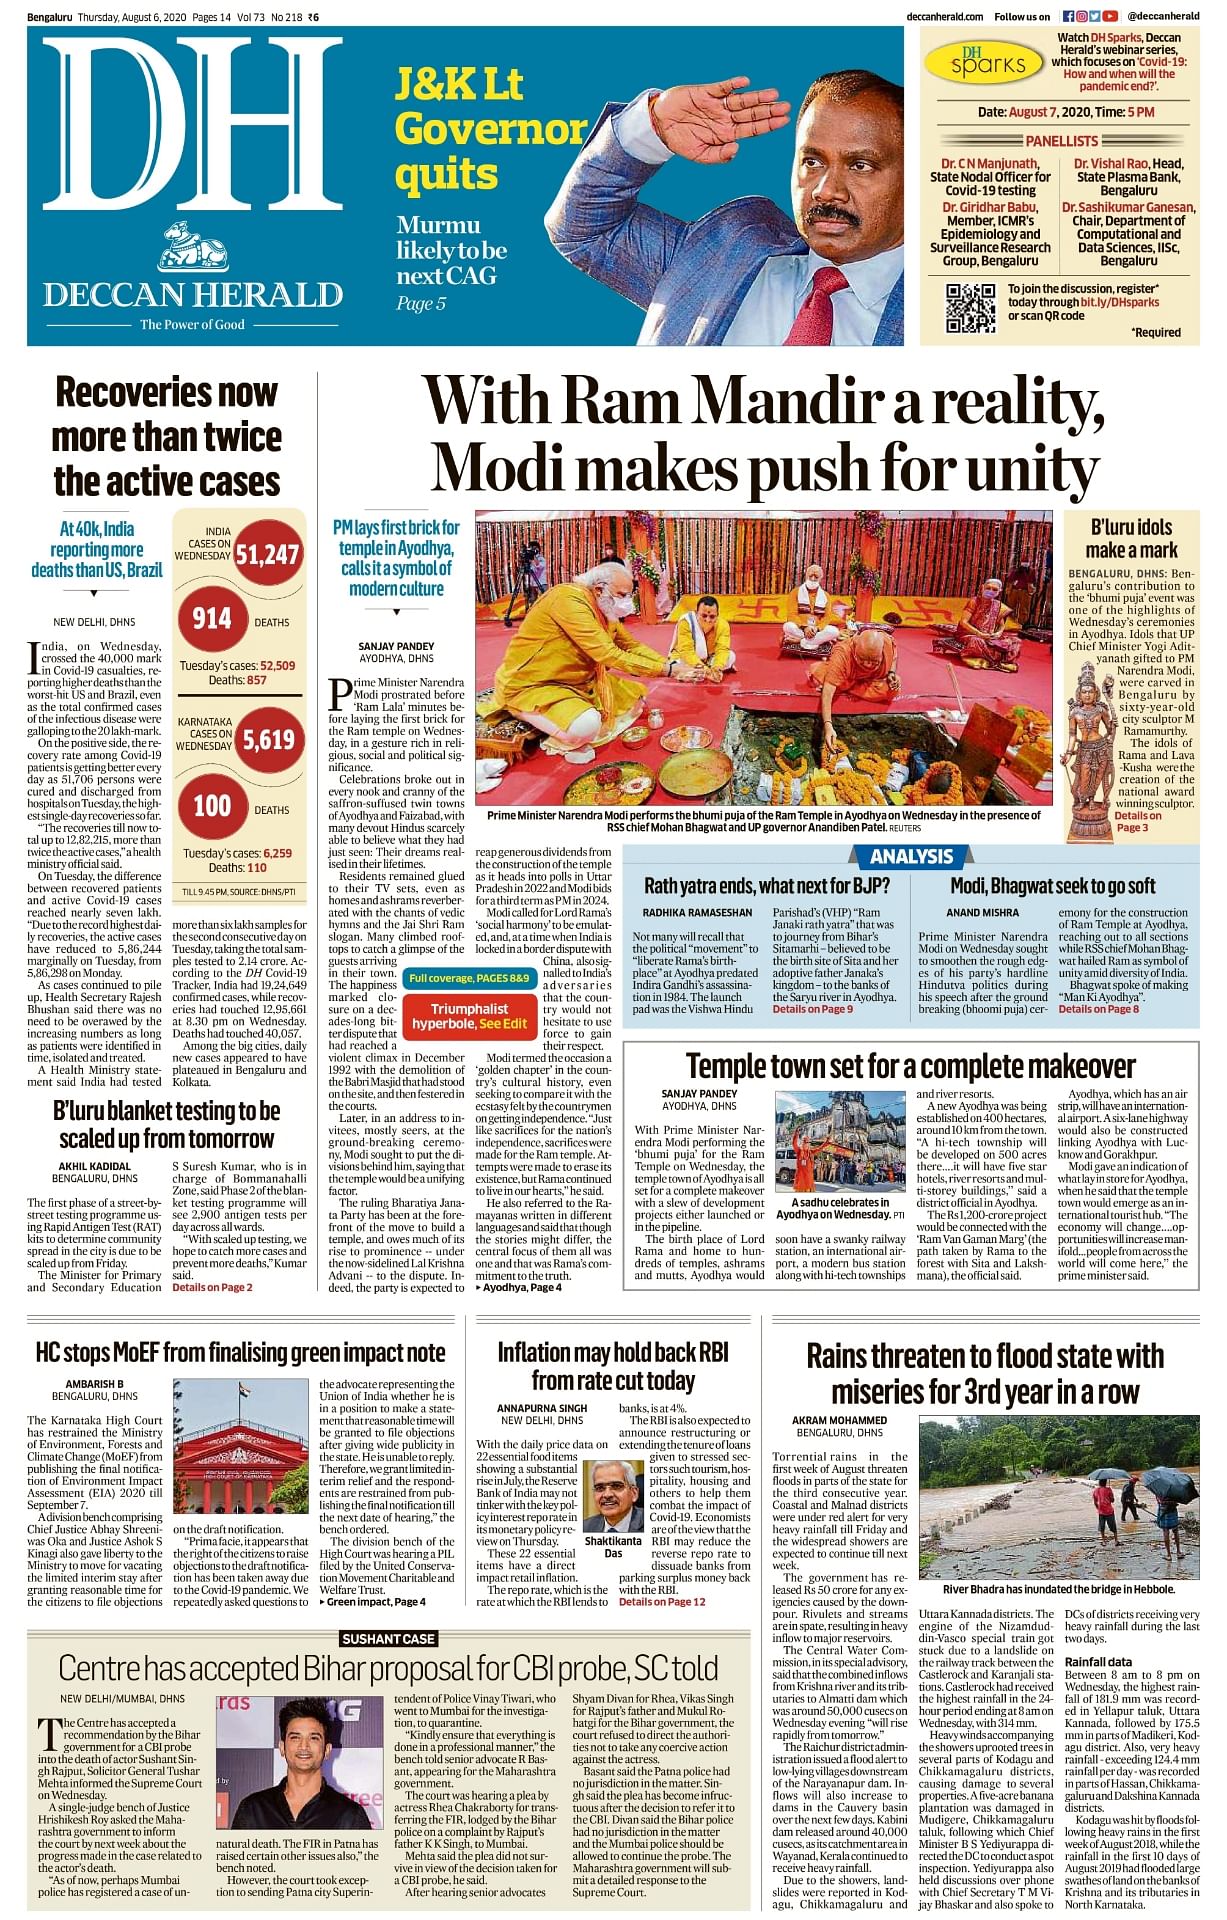 Deccan Herald says, "With Ram Mandir a reality, Modi makes push for unity".